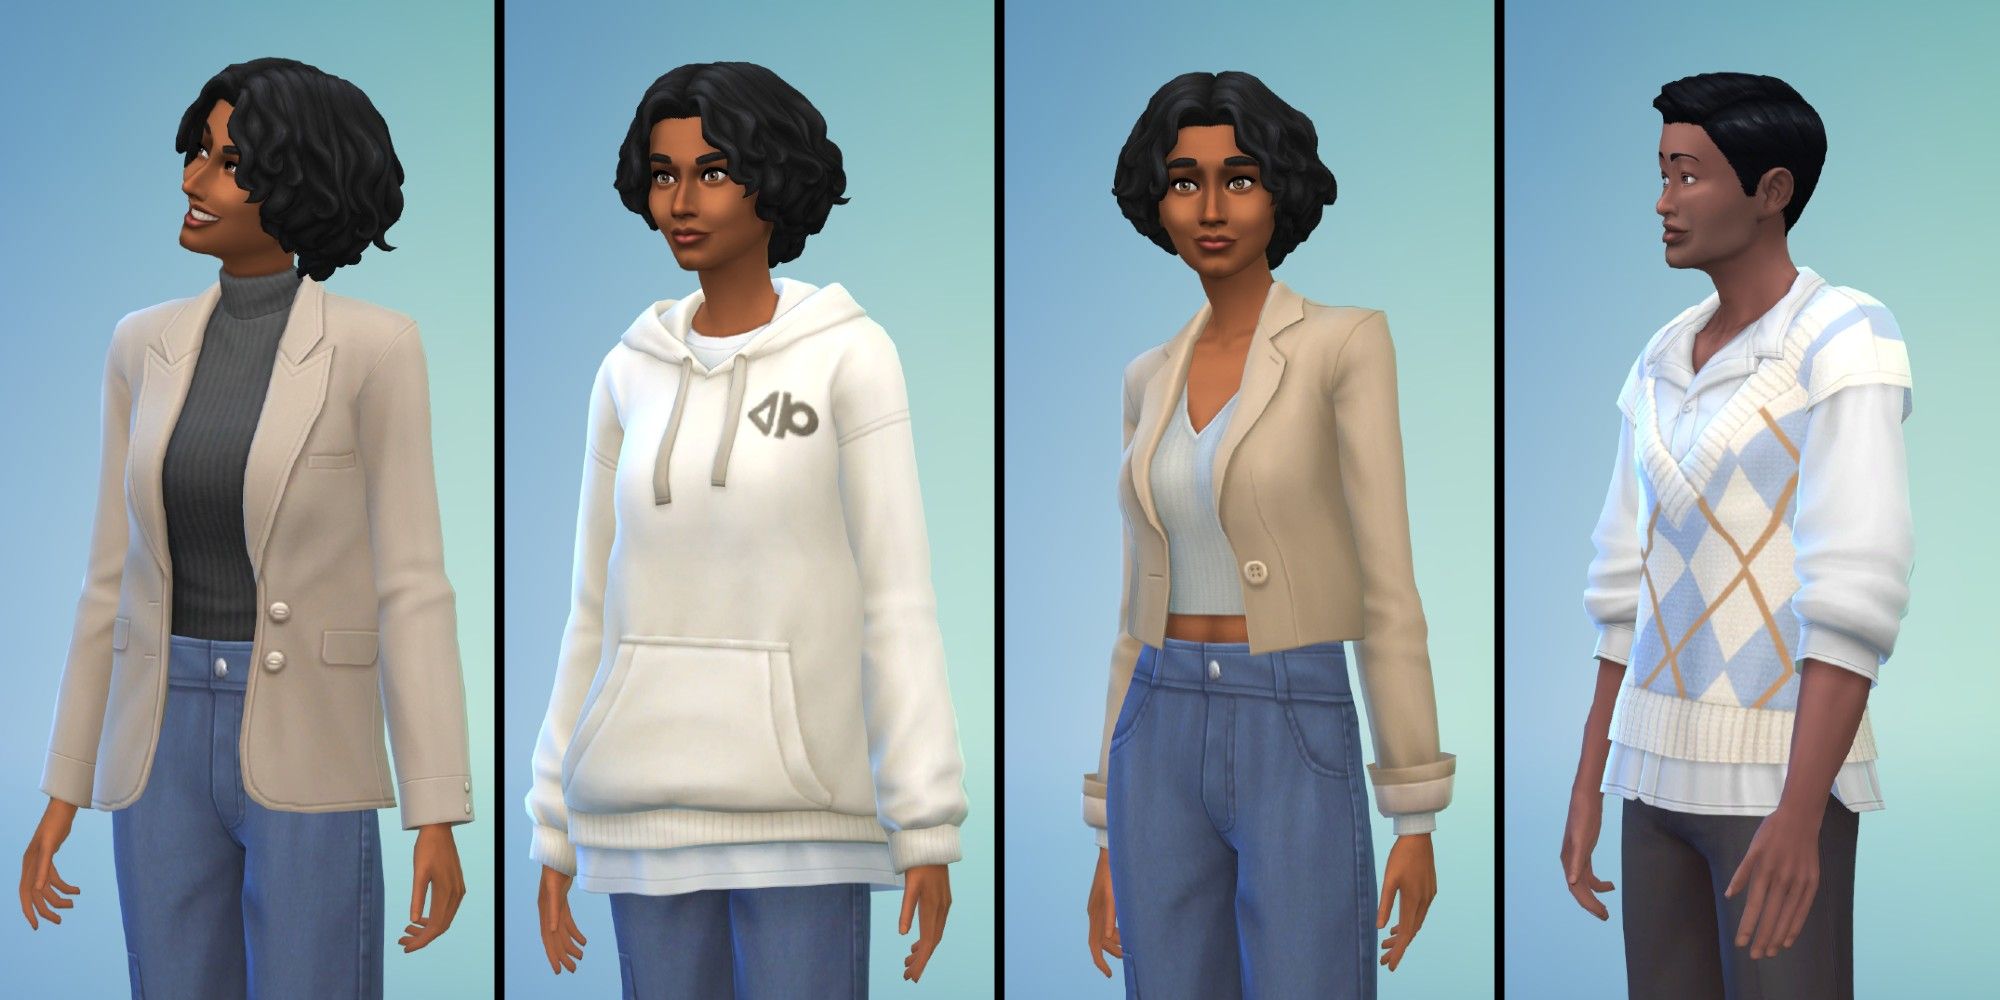 Sims Life Story on X: Where can I find recolours of this hoodie from Cool  Kitchen stuff? The shape and style is perfect but the colours and pattern  are all wrong for